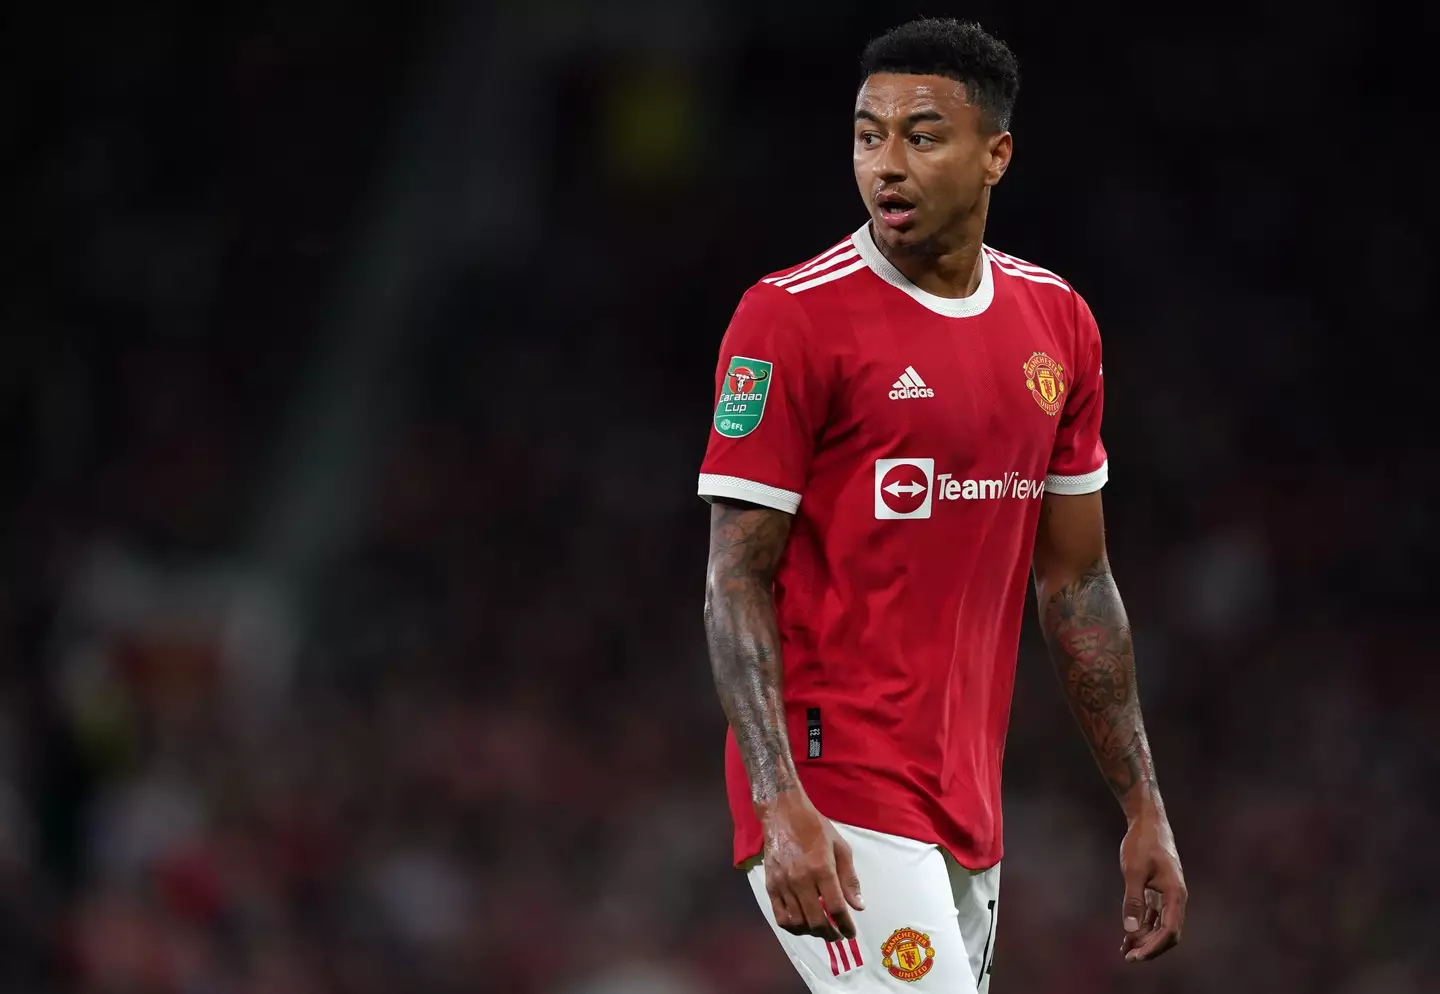 Lingard is yet to start a Premier League match this season (Image: PA)